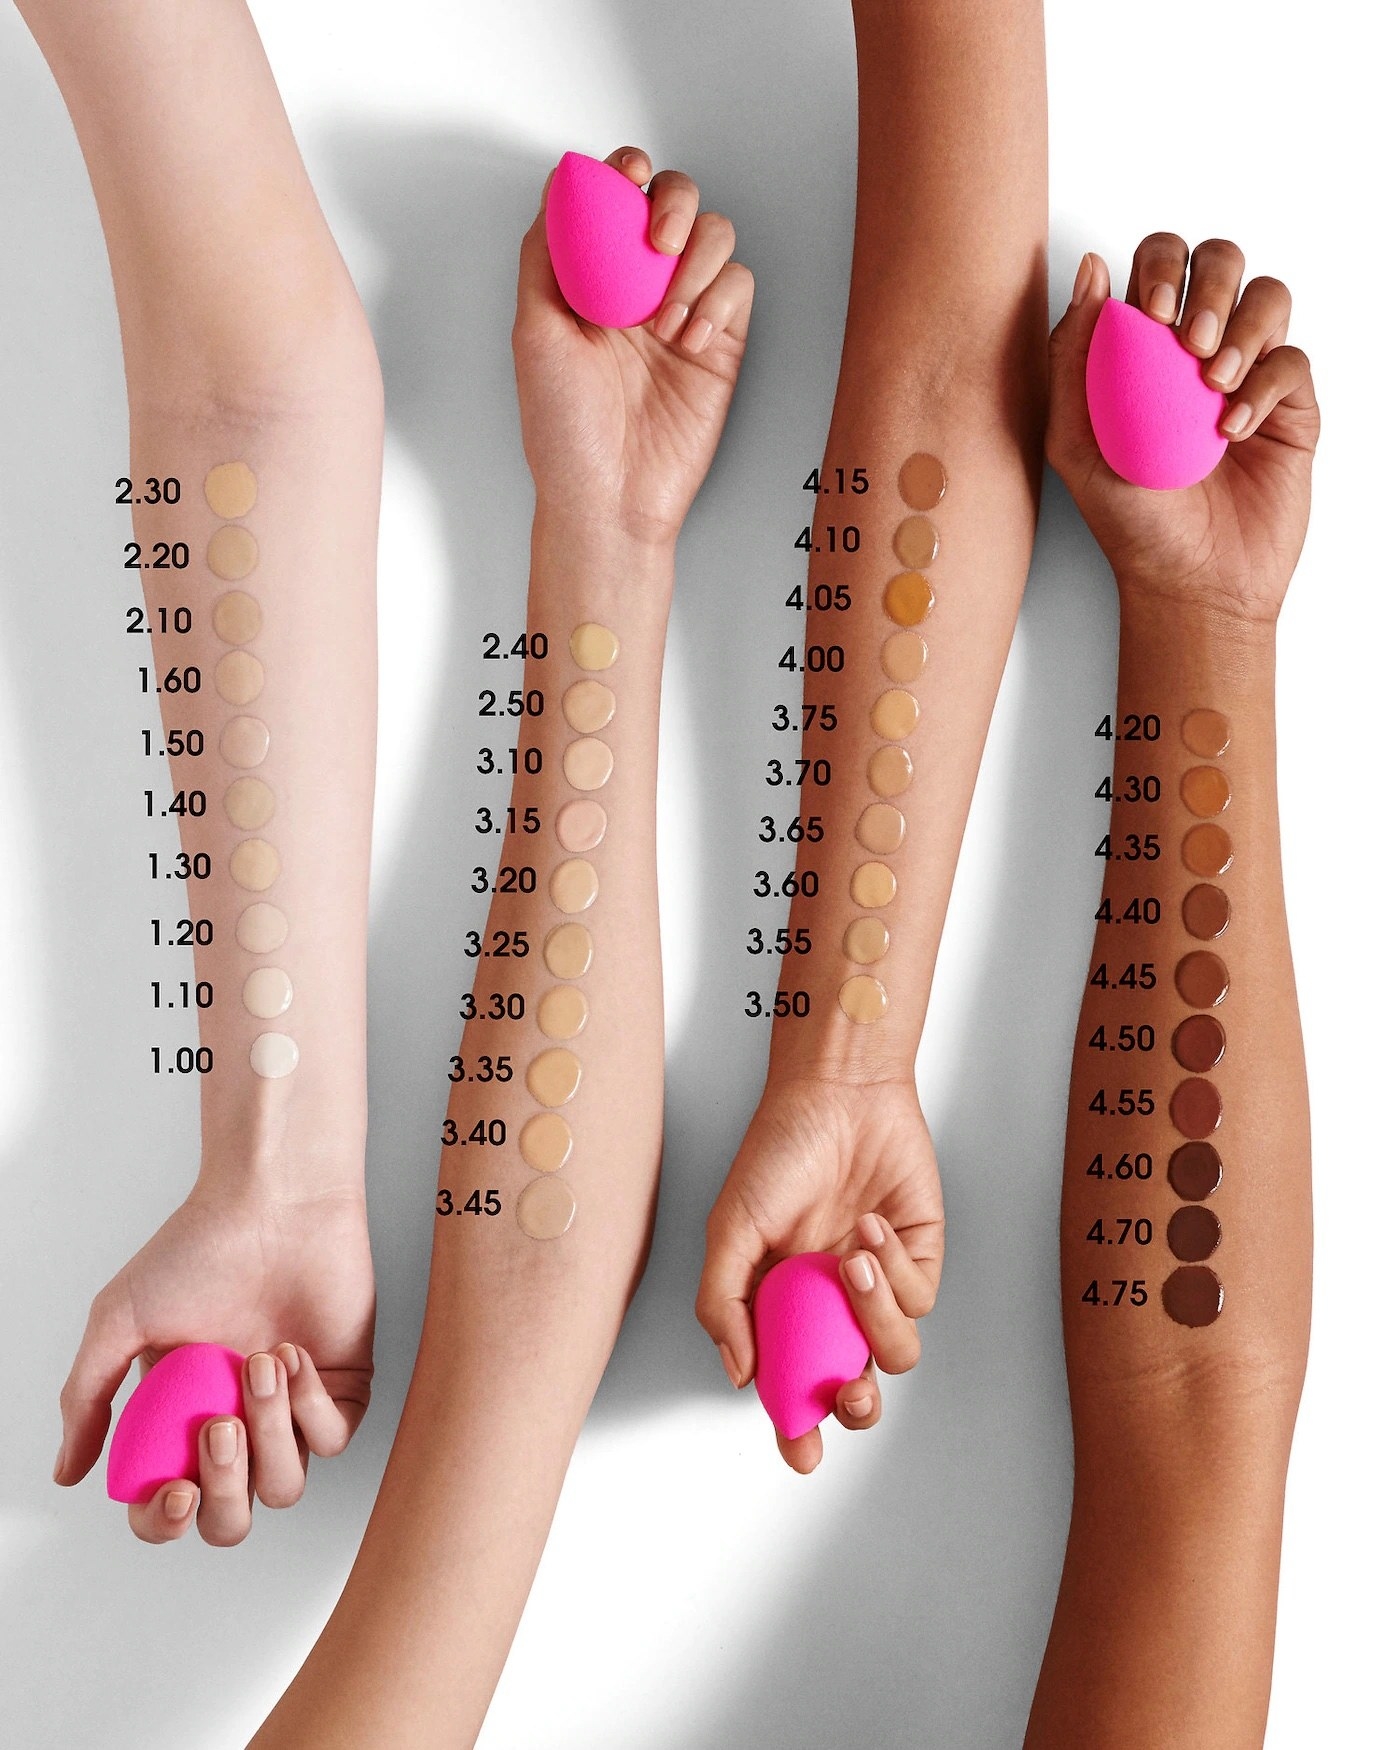 Models with different skin tones and swatches of every shade